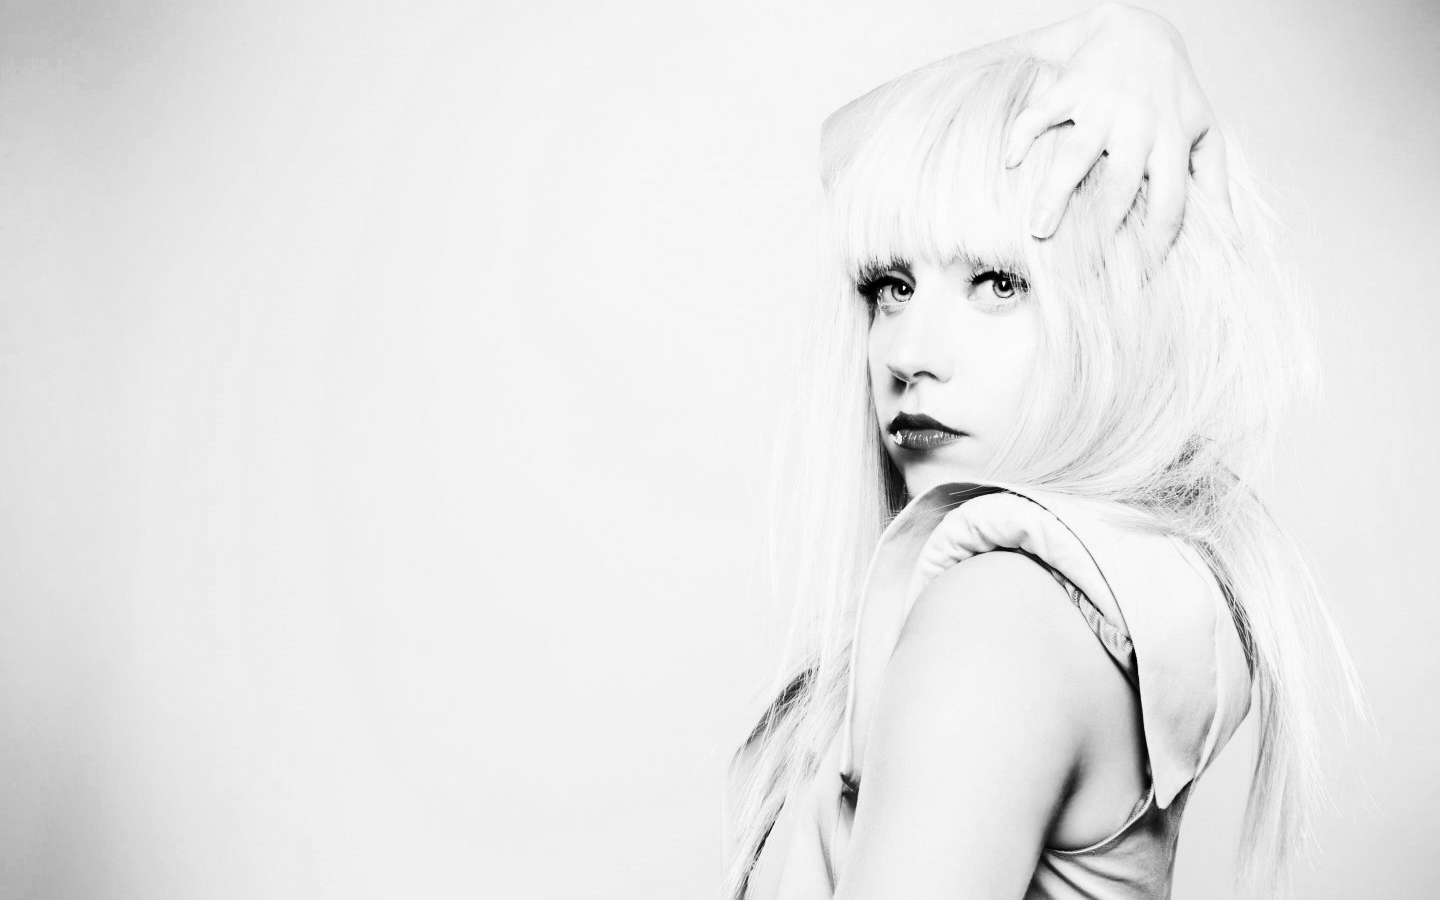 Lady Gaga Computer Wallpapers, Desktop Backgrounds 1440x900 ID